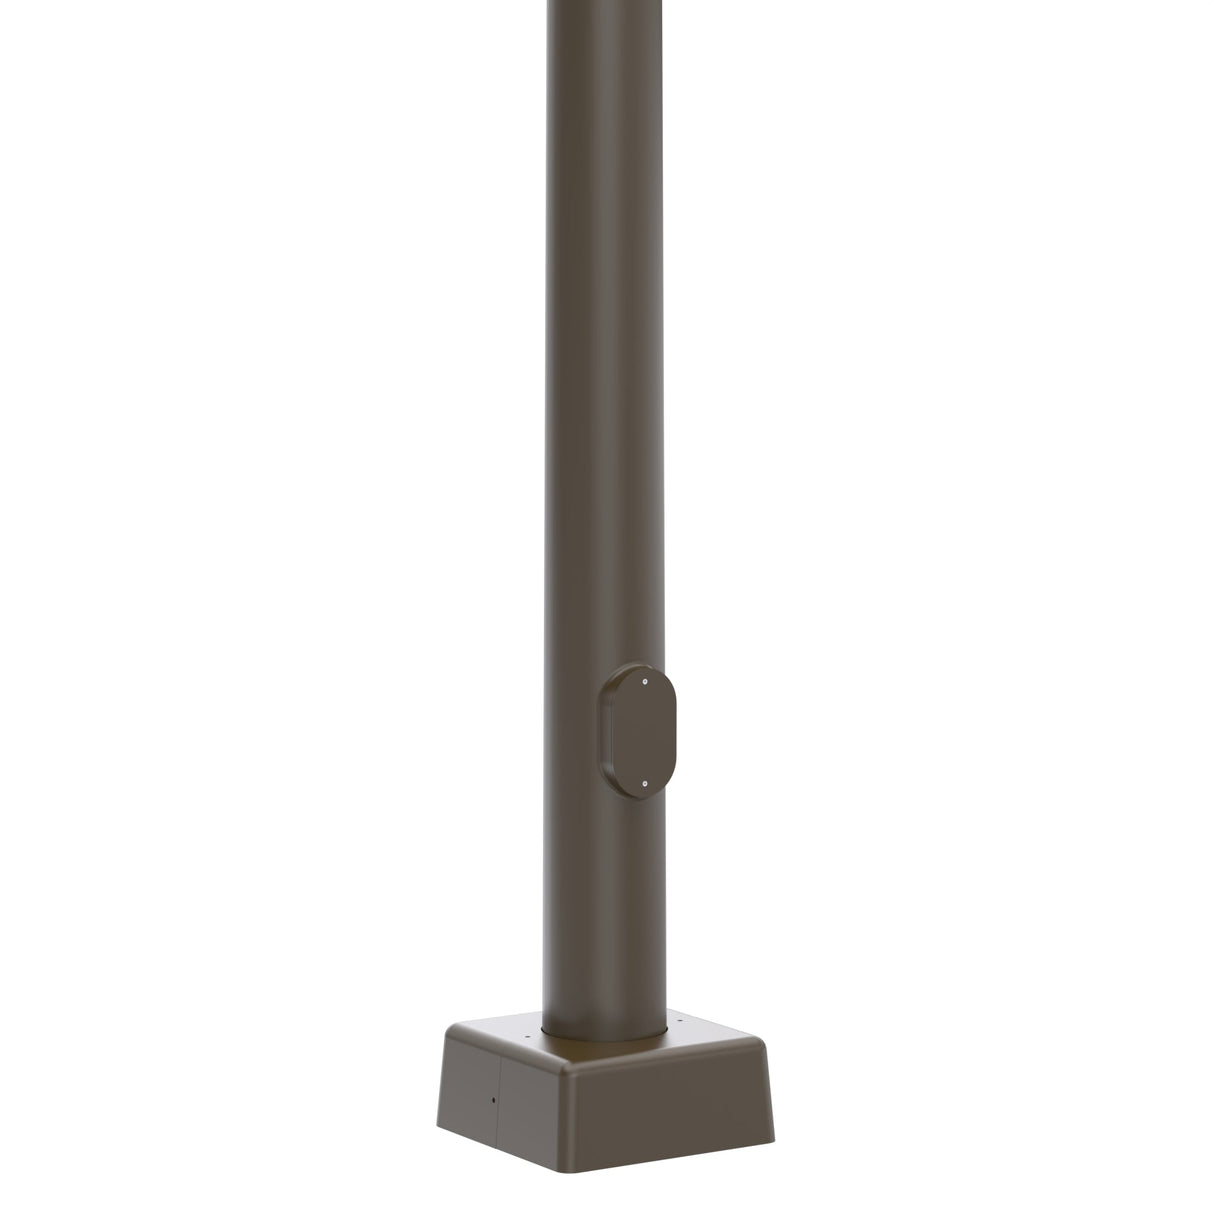 55' Tall x 12.5" Base OD x 5.2" Top OD x 5 & 7ga Thick, Round Tapered Steel, Anchor Base Light Pole